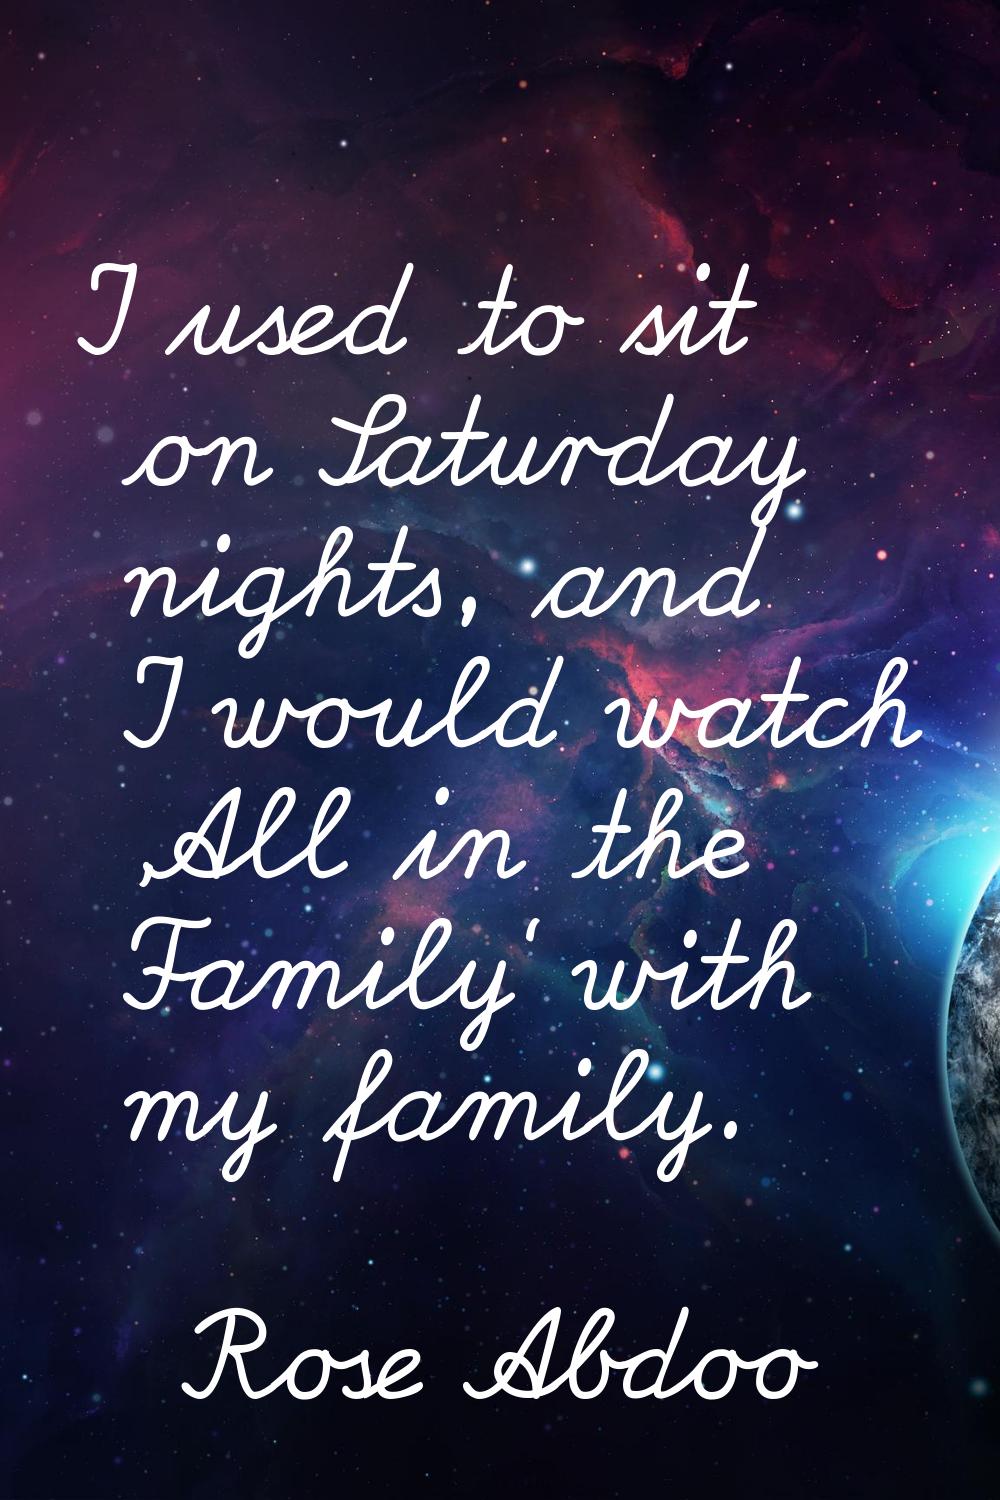 I used to sit on Saturday nights, and I would watch 'All in the Family' with my family.